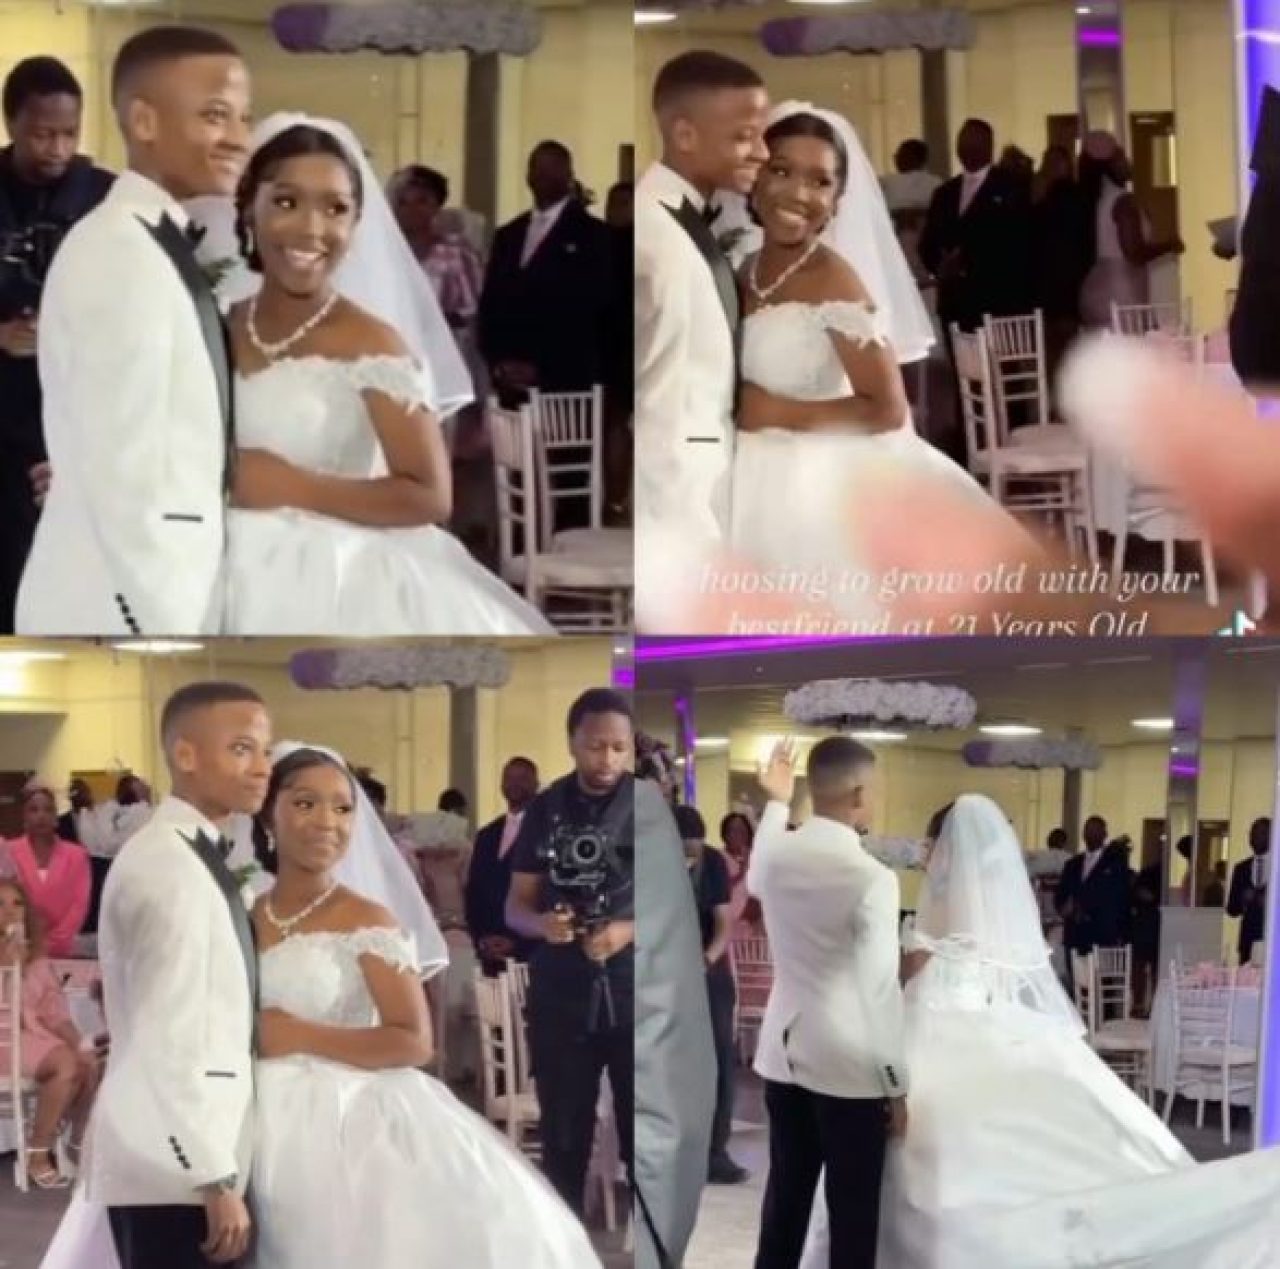 Young couple go viral for marrying at the age 21. AdvertAfrica News on afronewswire.com: Amplifying Africa's Voice | afronewswire.com | Breaking News & Stories